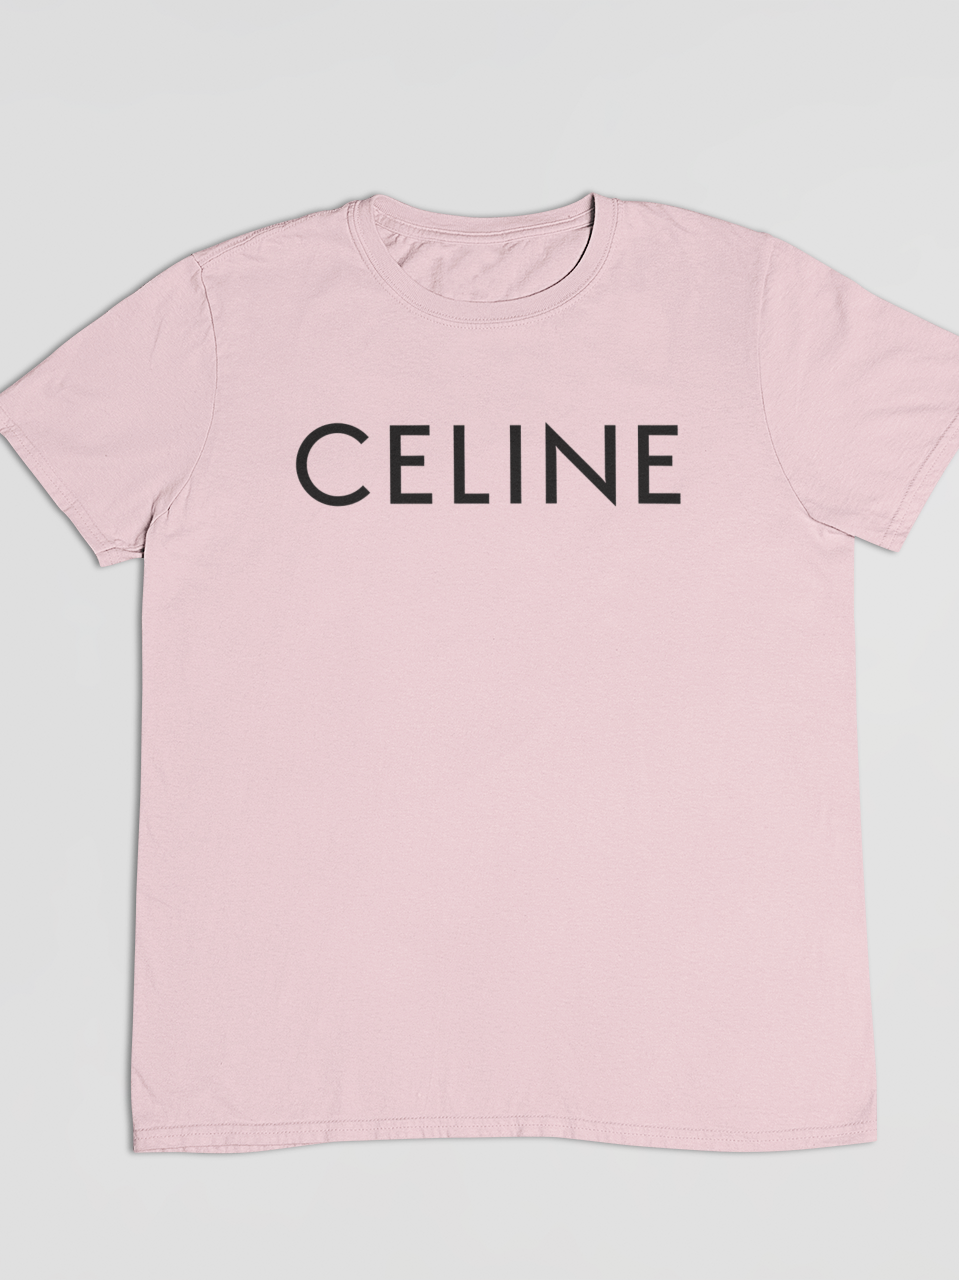 Baby Pink CeCe Dark Print T-Shirt Out The Purse